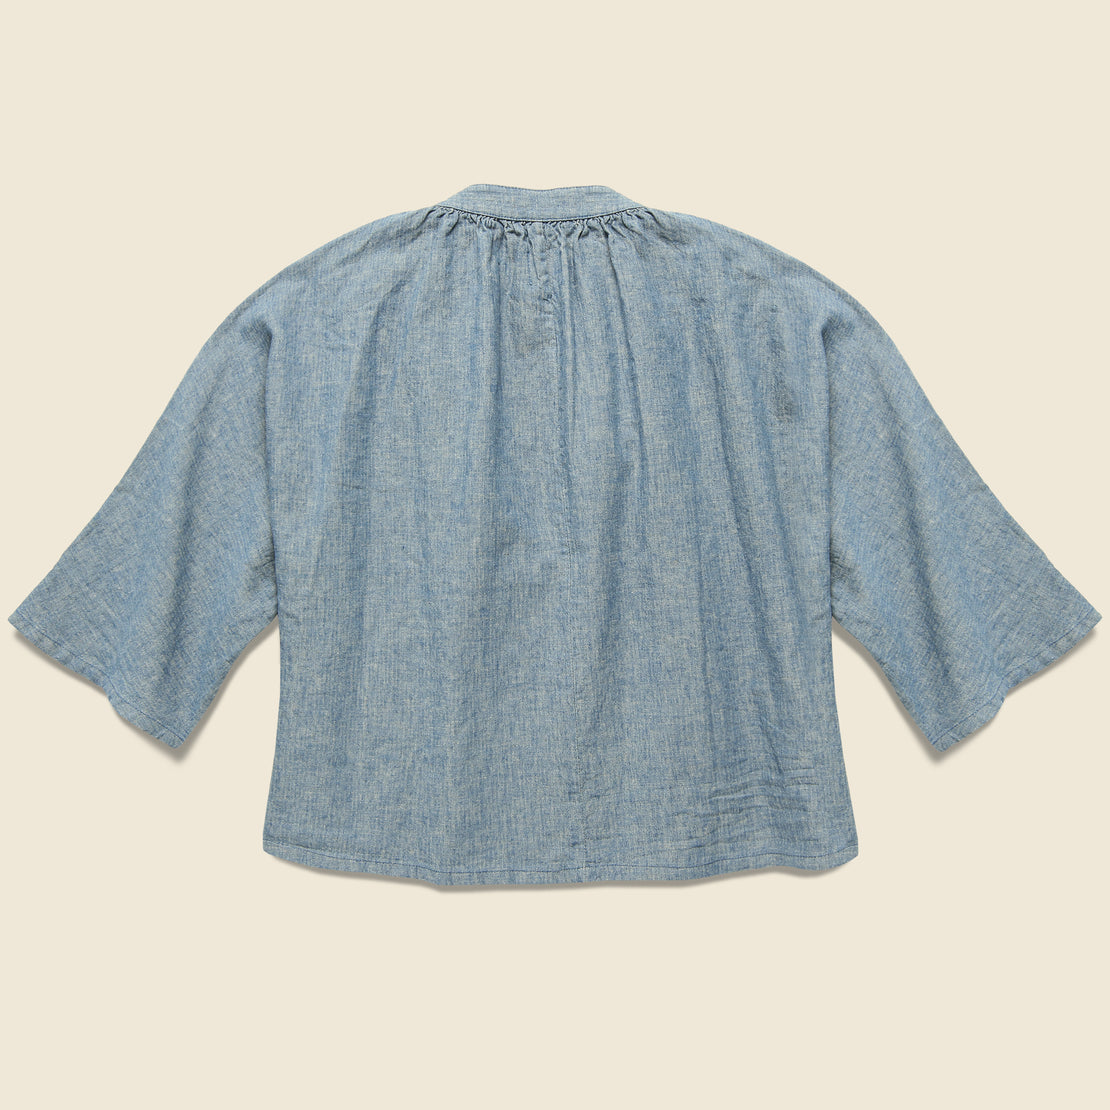 Lily Top - Chambray Herringbone - Esby - STAG Provisions - W - Tops - S/S Woven